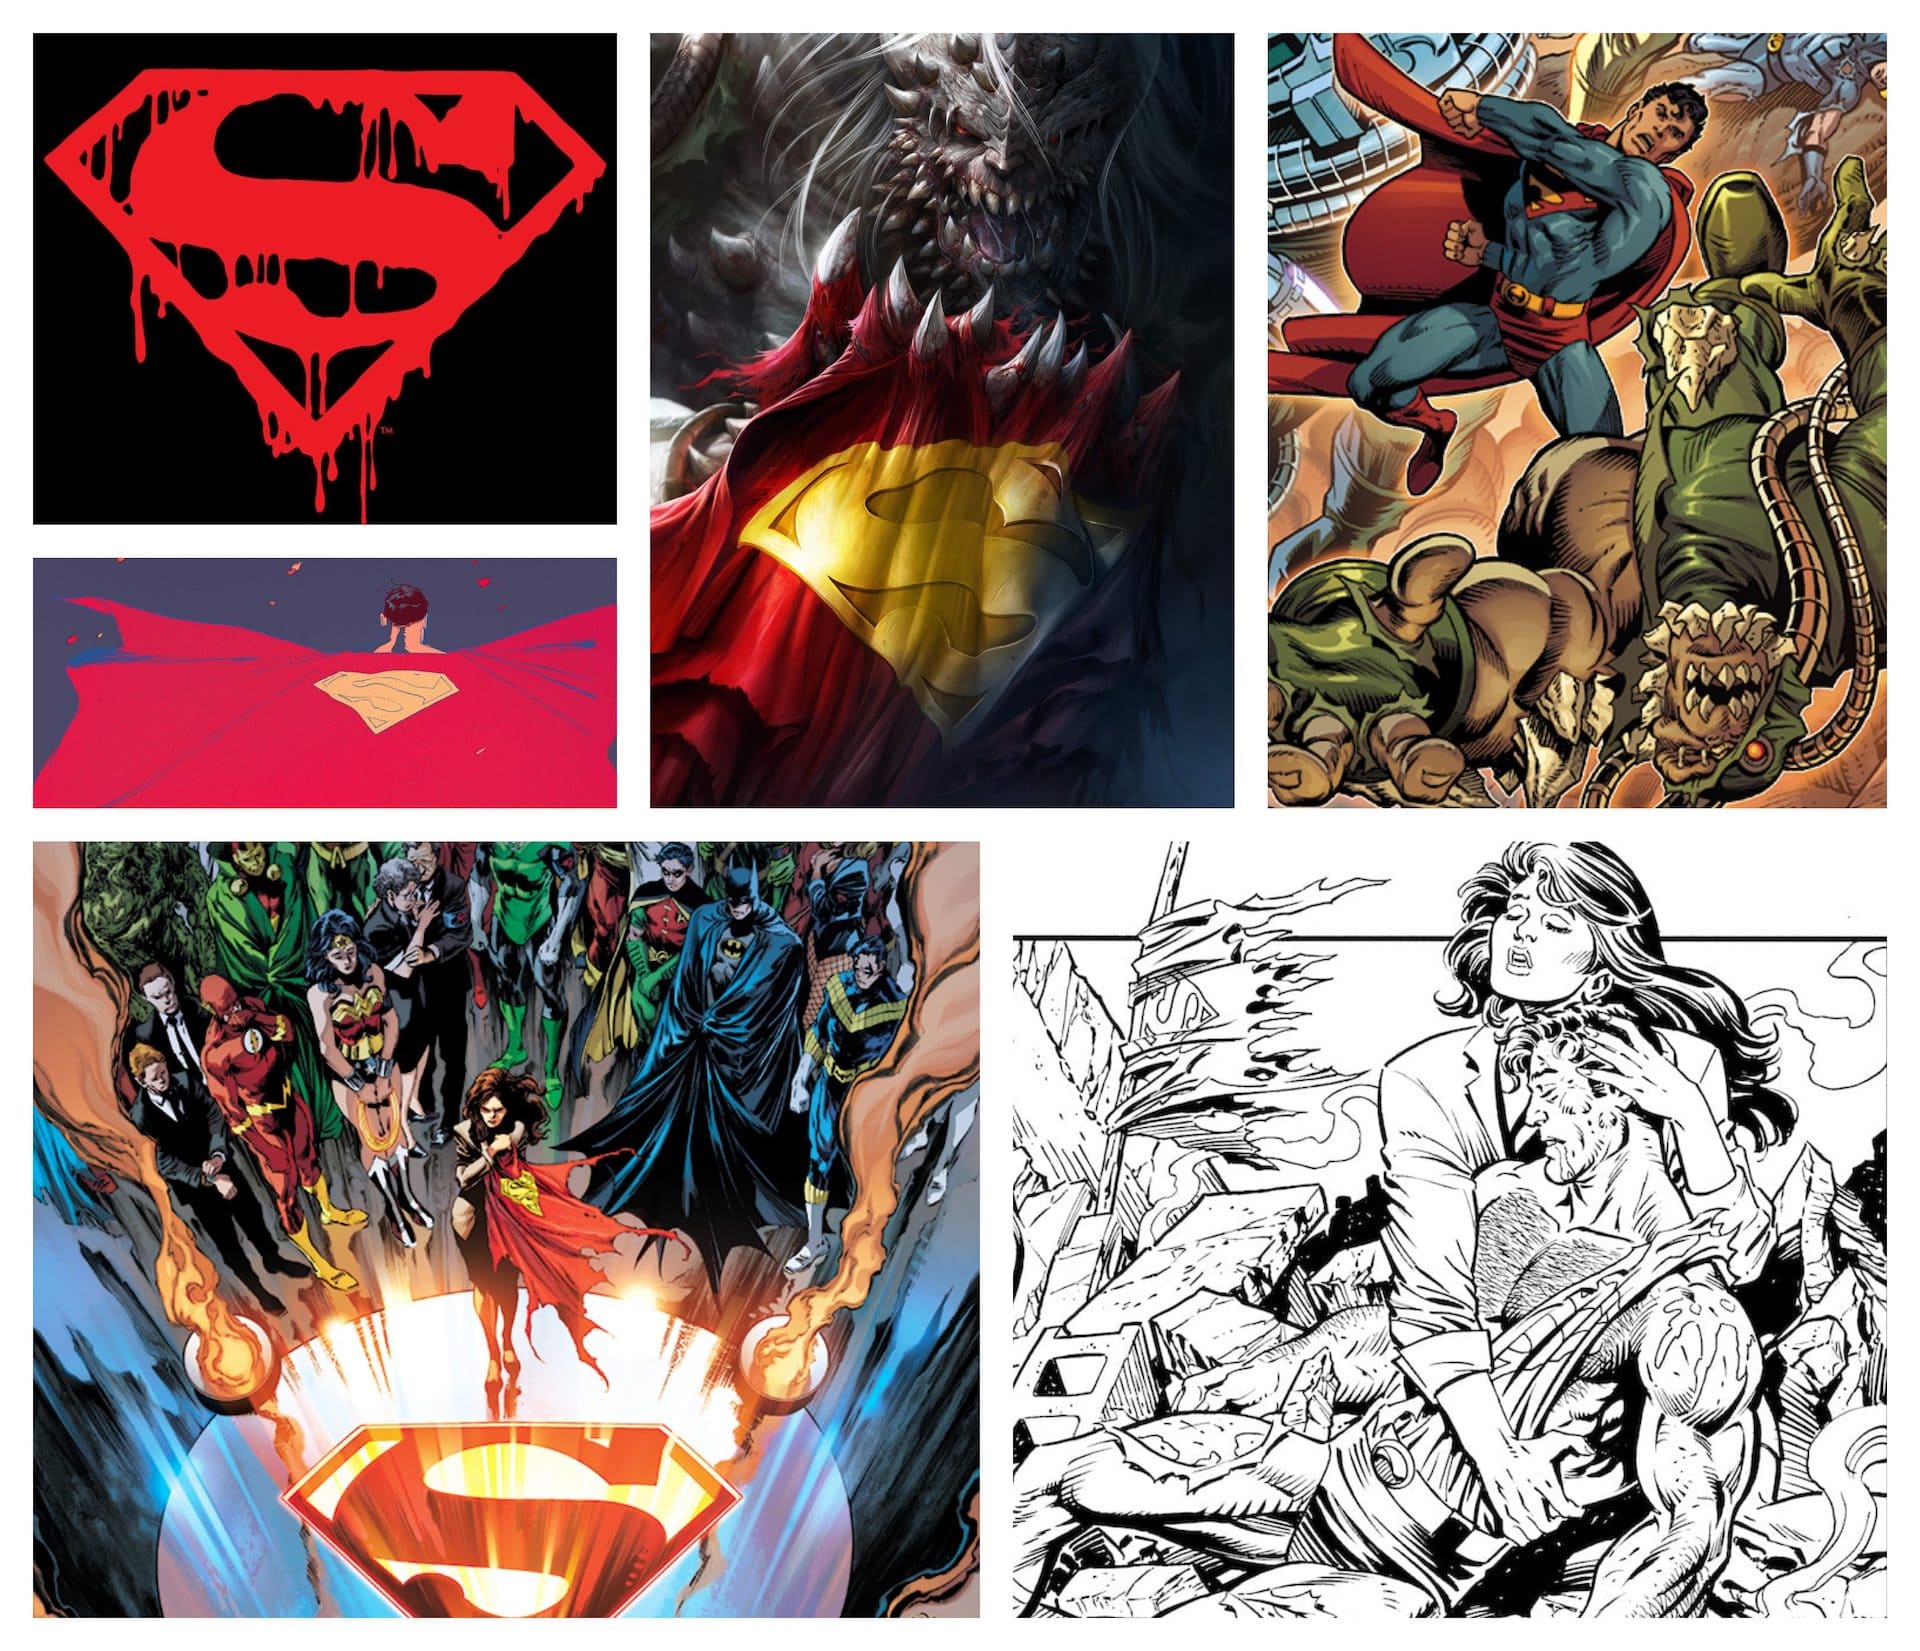 'The Death of Superman 30th Anniversary Special' #1 shows four new POVs on Superman's death